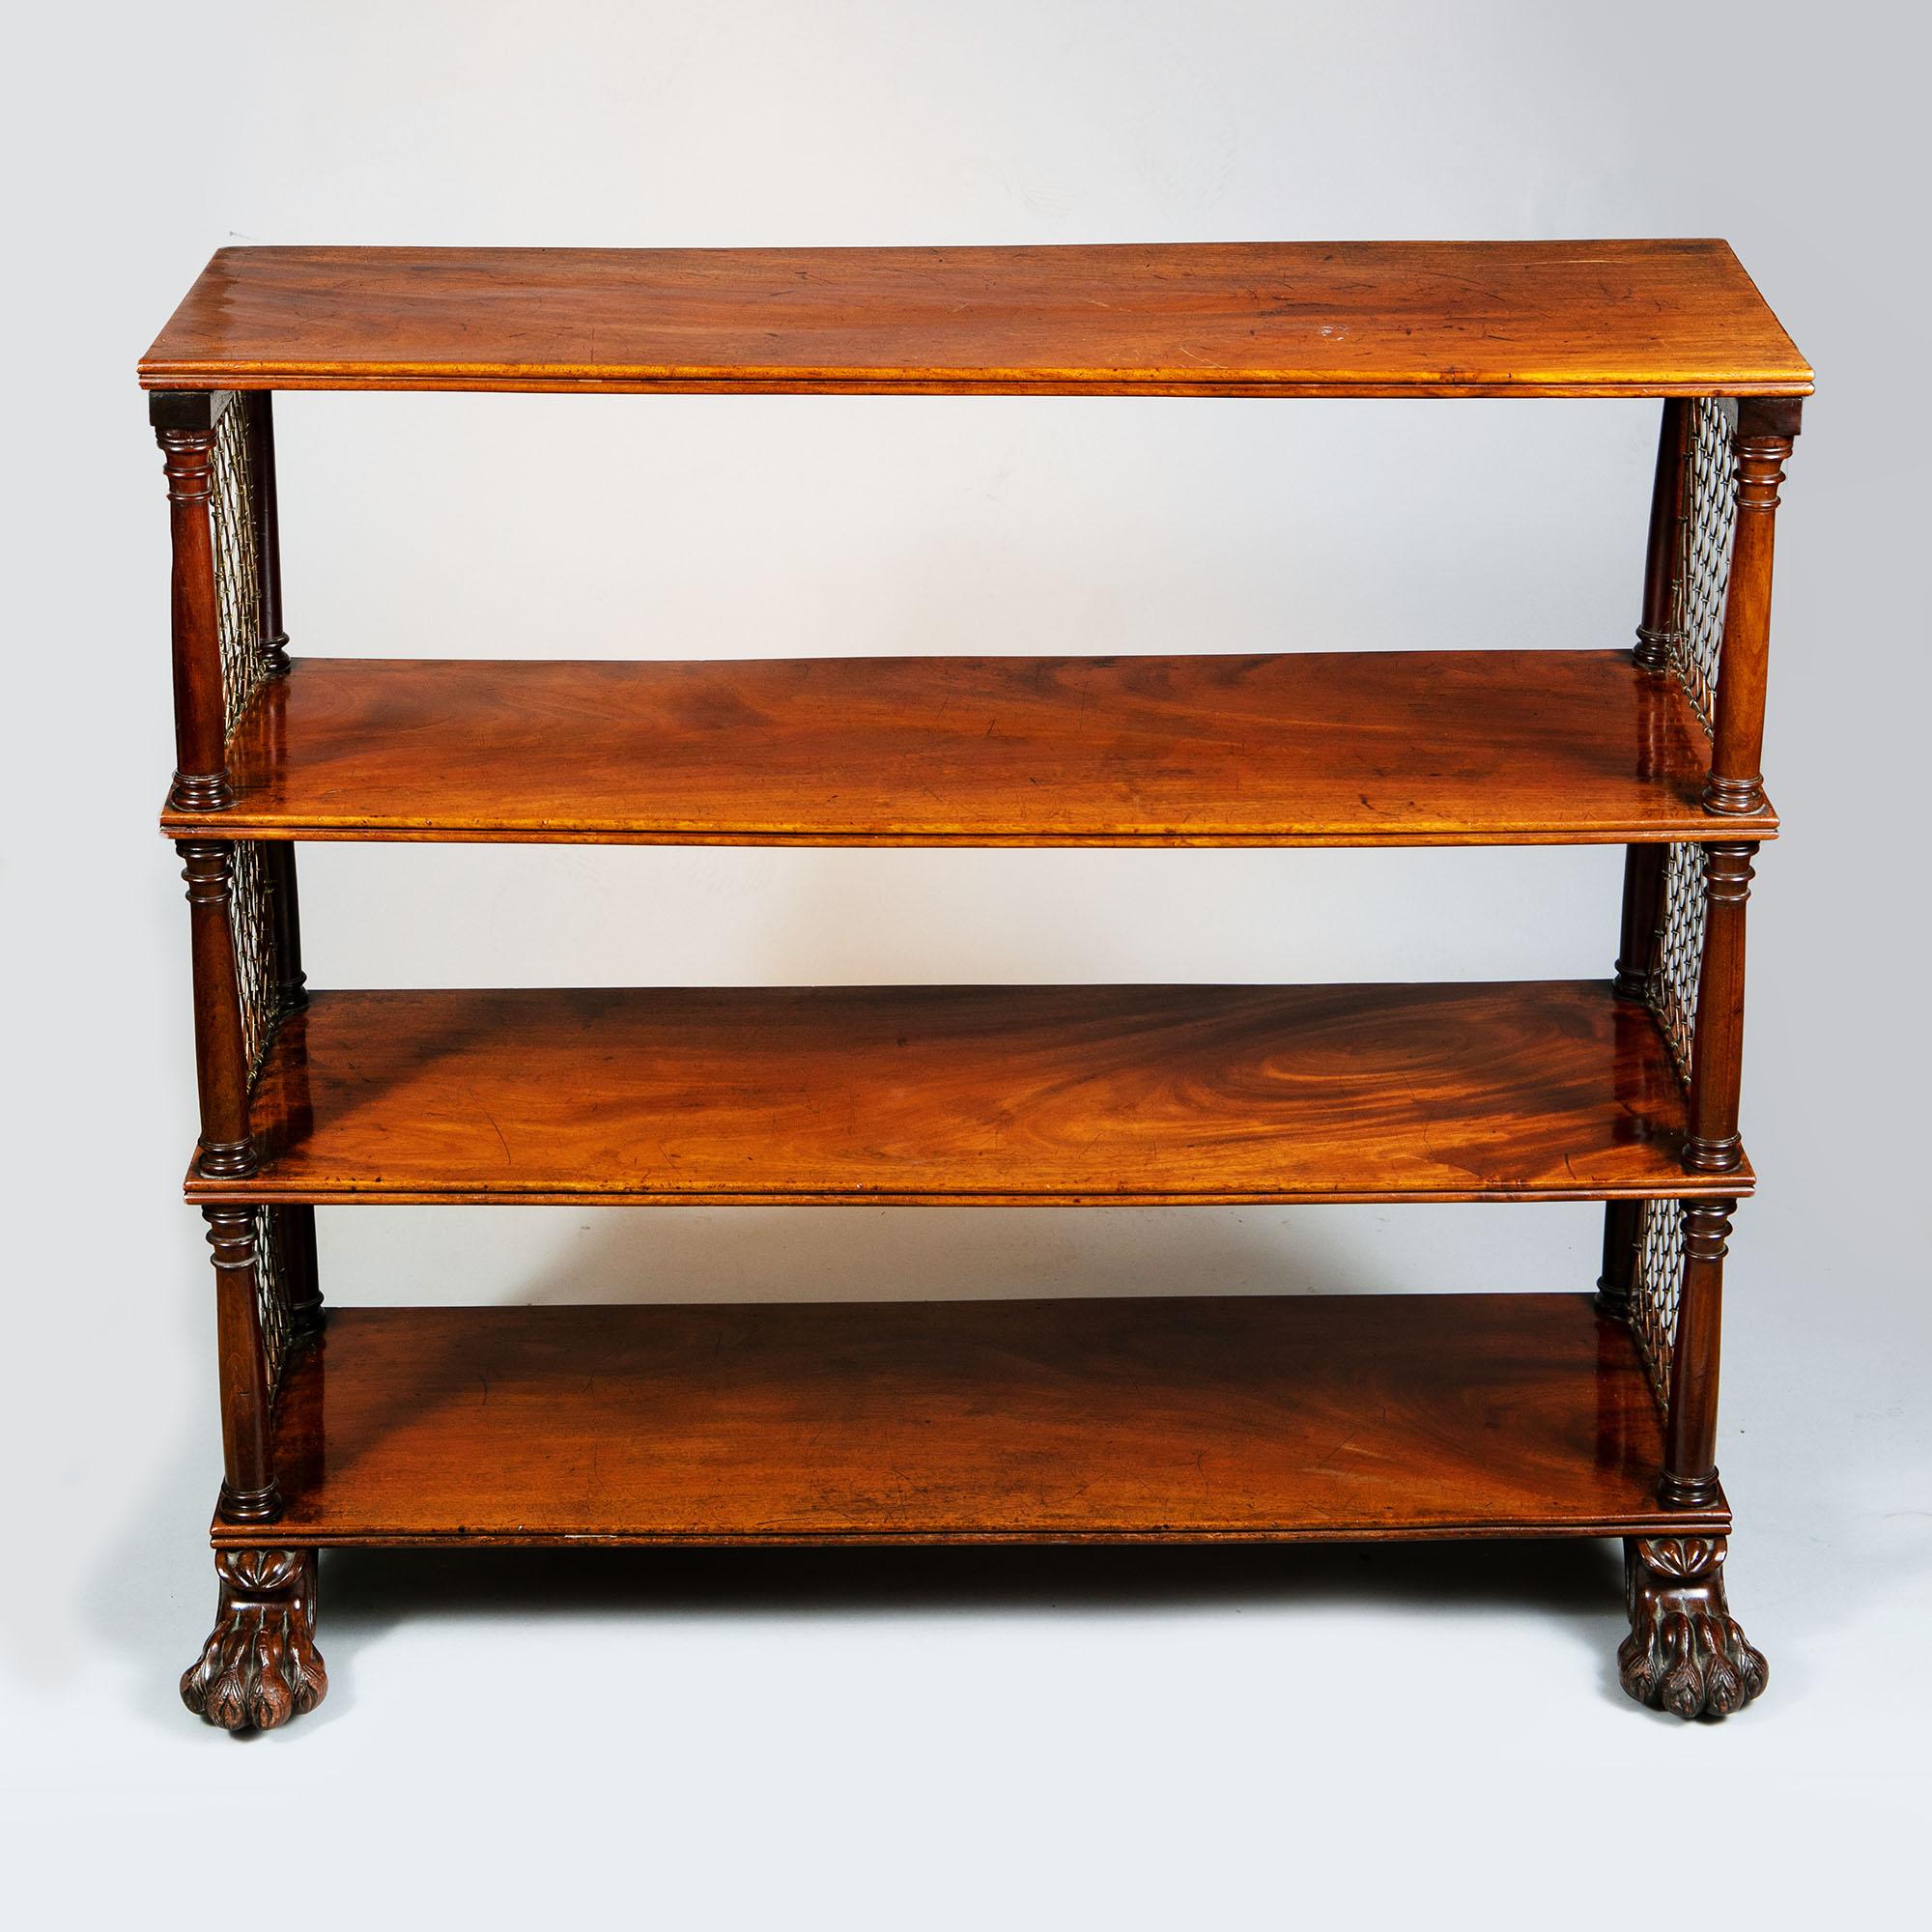 A small Regency bookcase, beautifully crafted with lattice brass on either end. The bookcase is stood on a pair of rather decoratively carved lion paw feet.